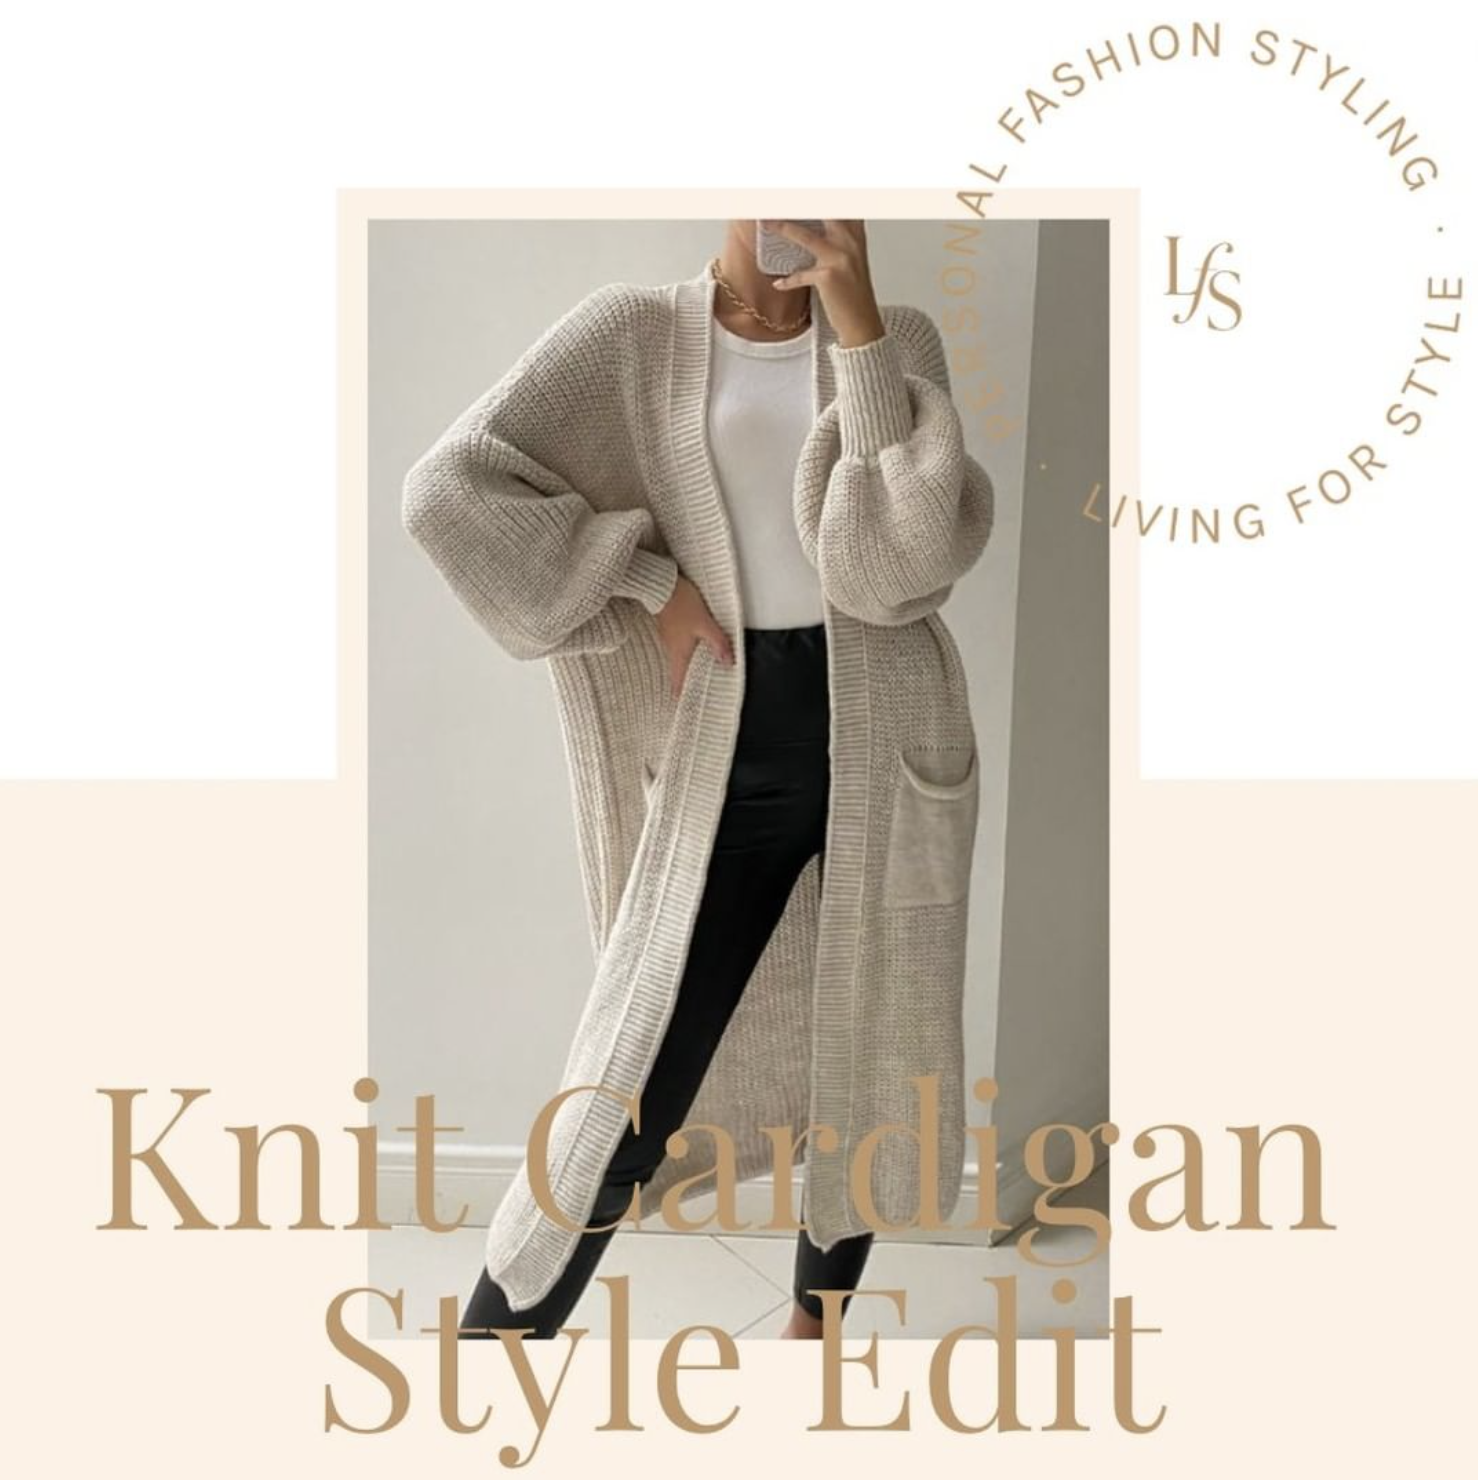 You are currently viewing Knit Cardigan Style Edit